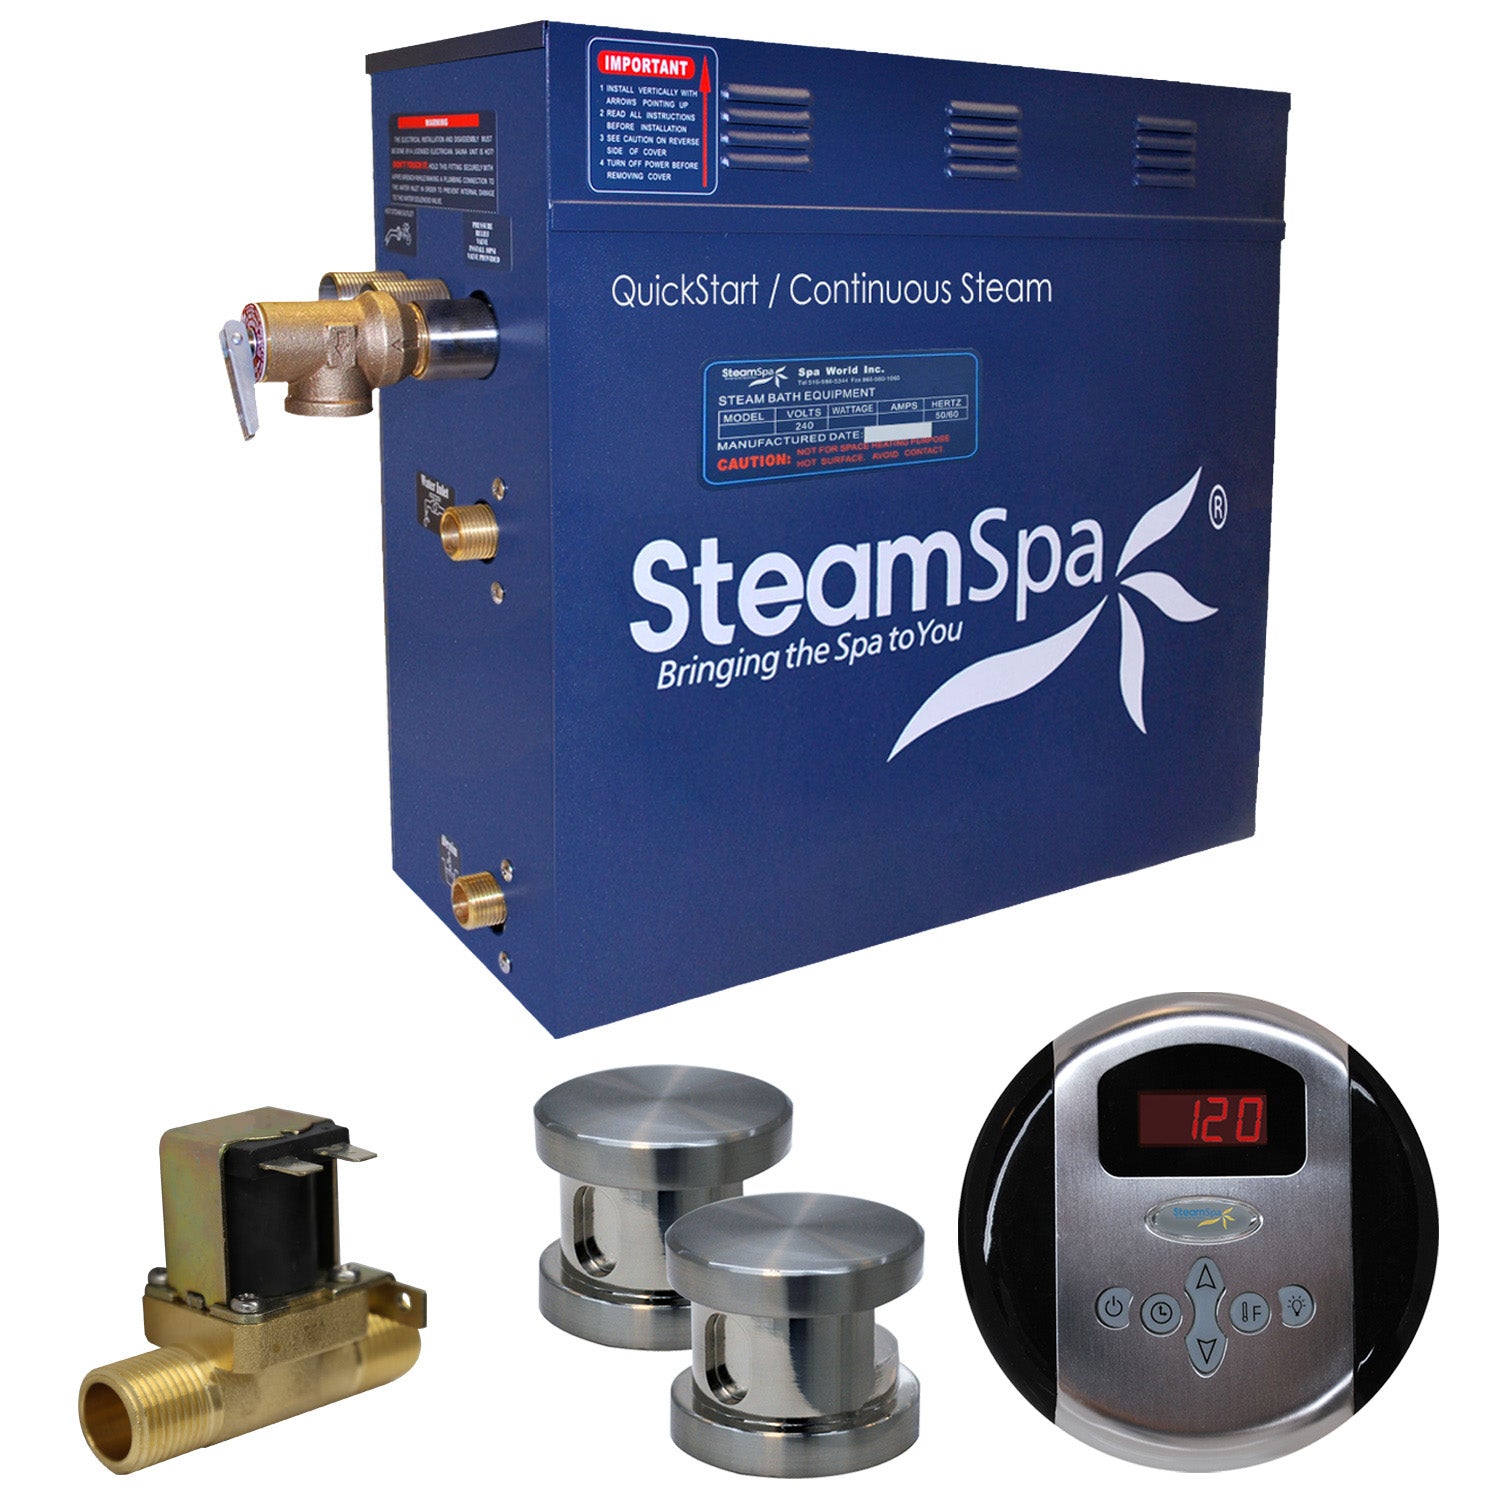 SteamSpa Oasis 6 KW QuickStart Acu-Steam Bath Generator Package OA600 - 16 in. L x 6.5 in. W x 14.5 in. H - Stainless Steel - Brushed Nickel - Includes a 6kW QuickStart Acu-Steam Bath Generator, Control Panel, Steam head, Pressure Relief Valve - Vital Hydrotherapy